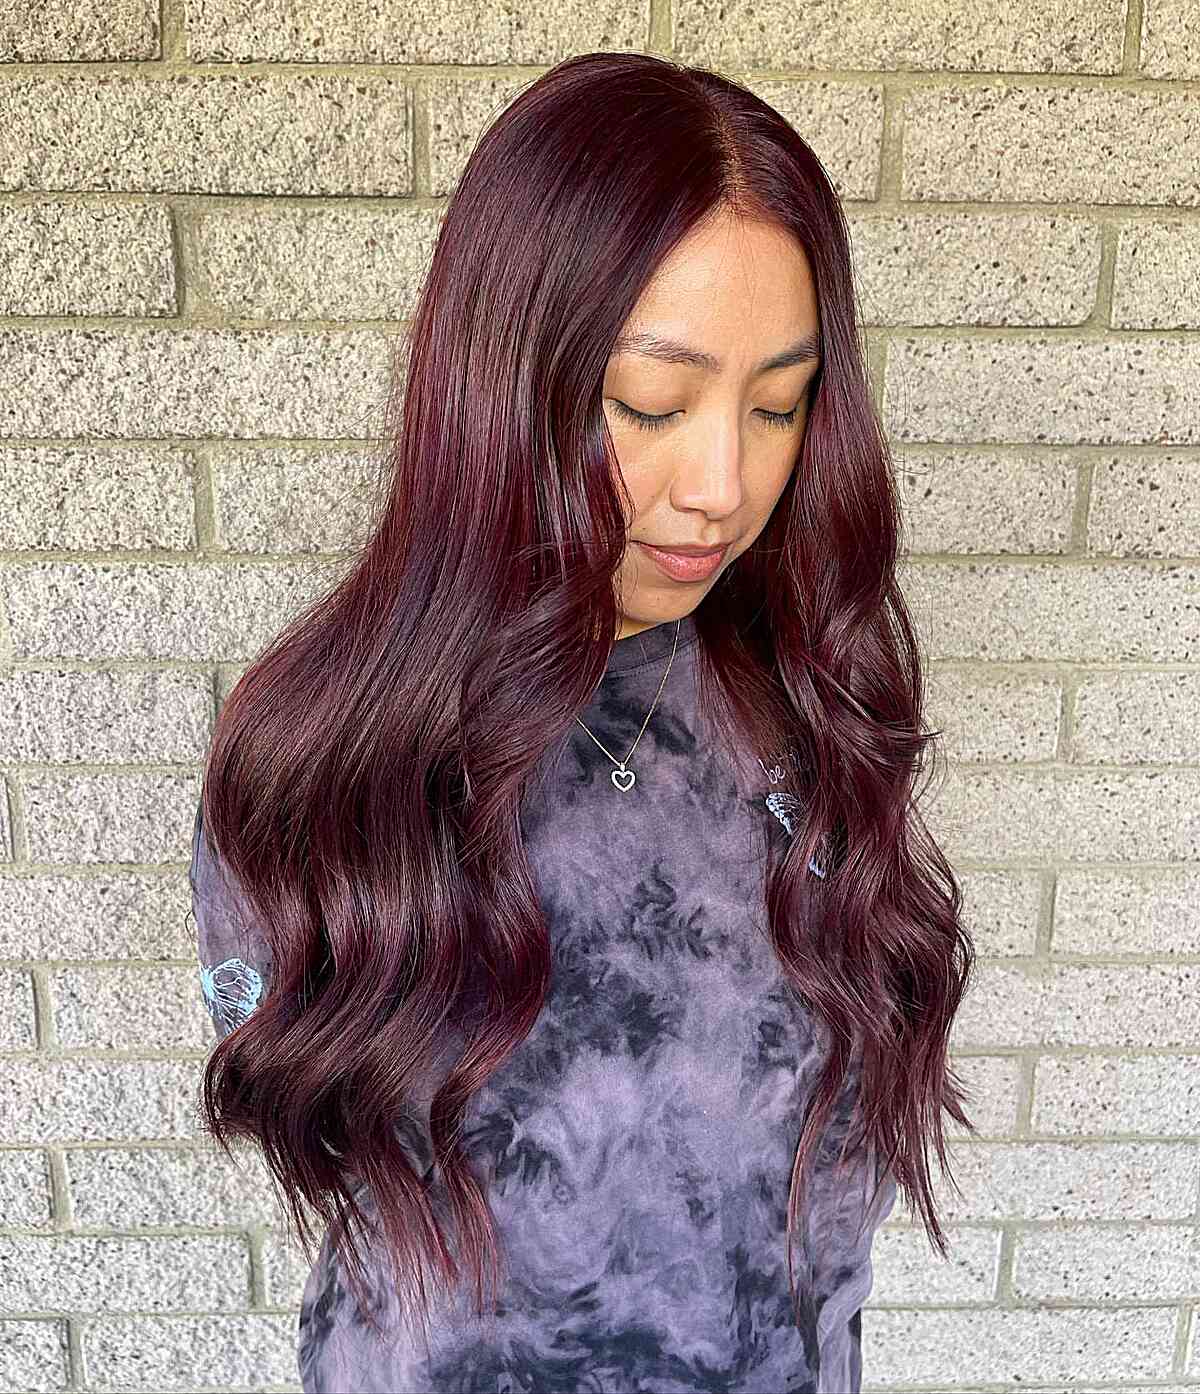 Solid Mahogany Red hair color